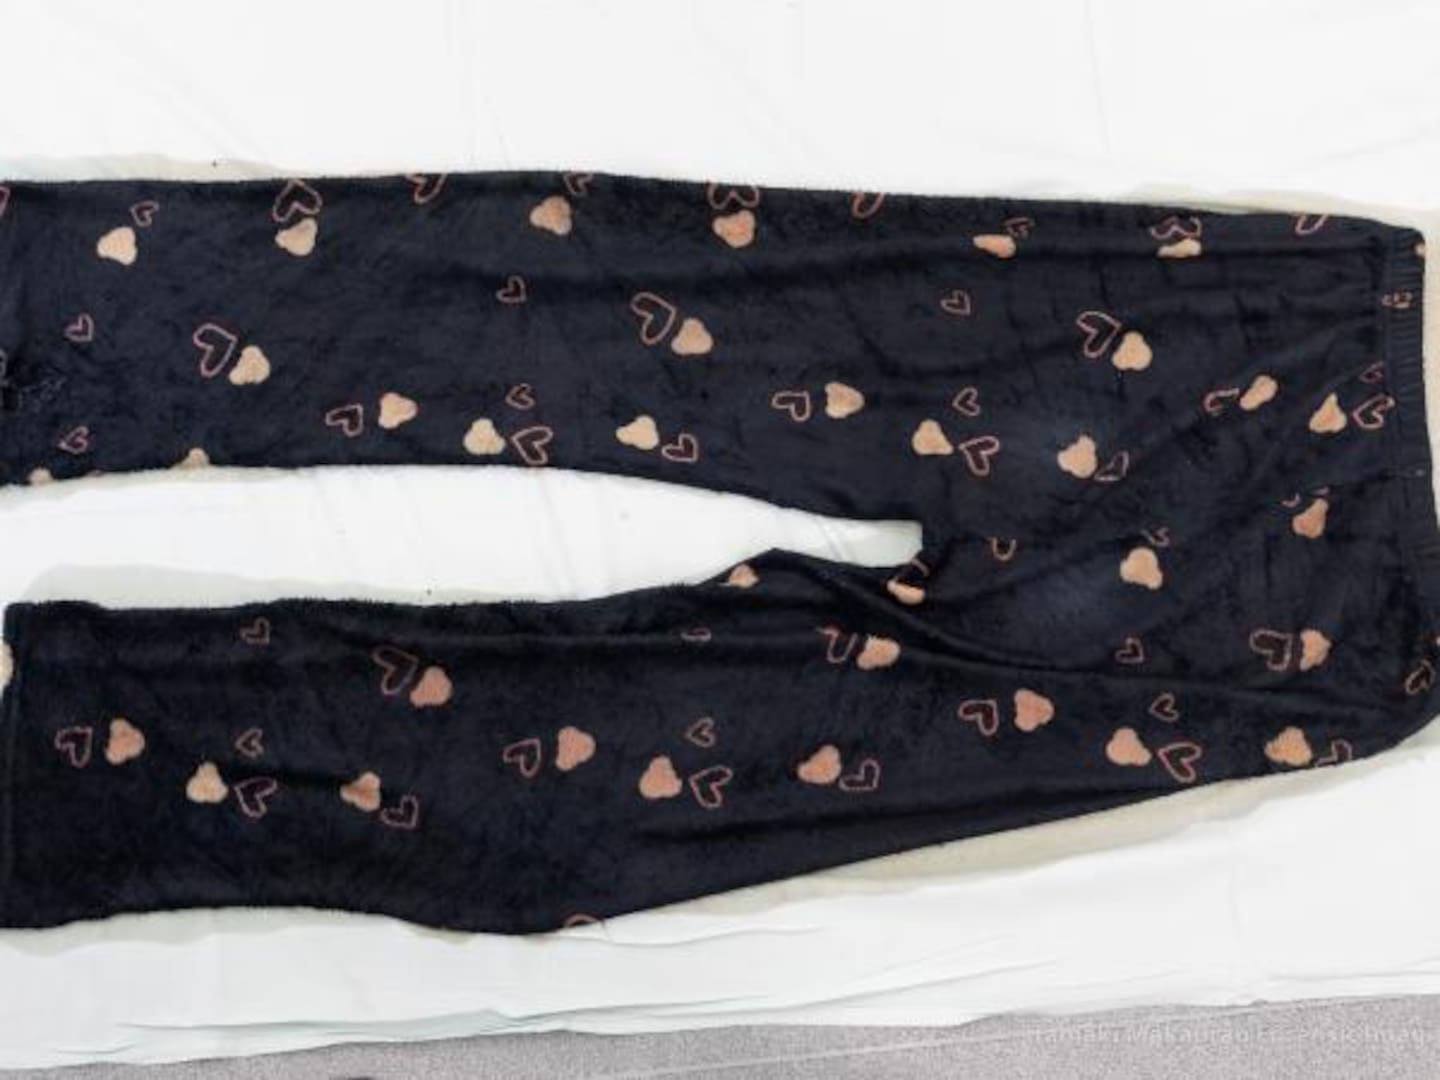 Police also released a photo of the pyjama pants she was found wearing, bearing a distinctive pattern. Photo / NZ Police